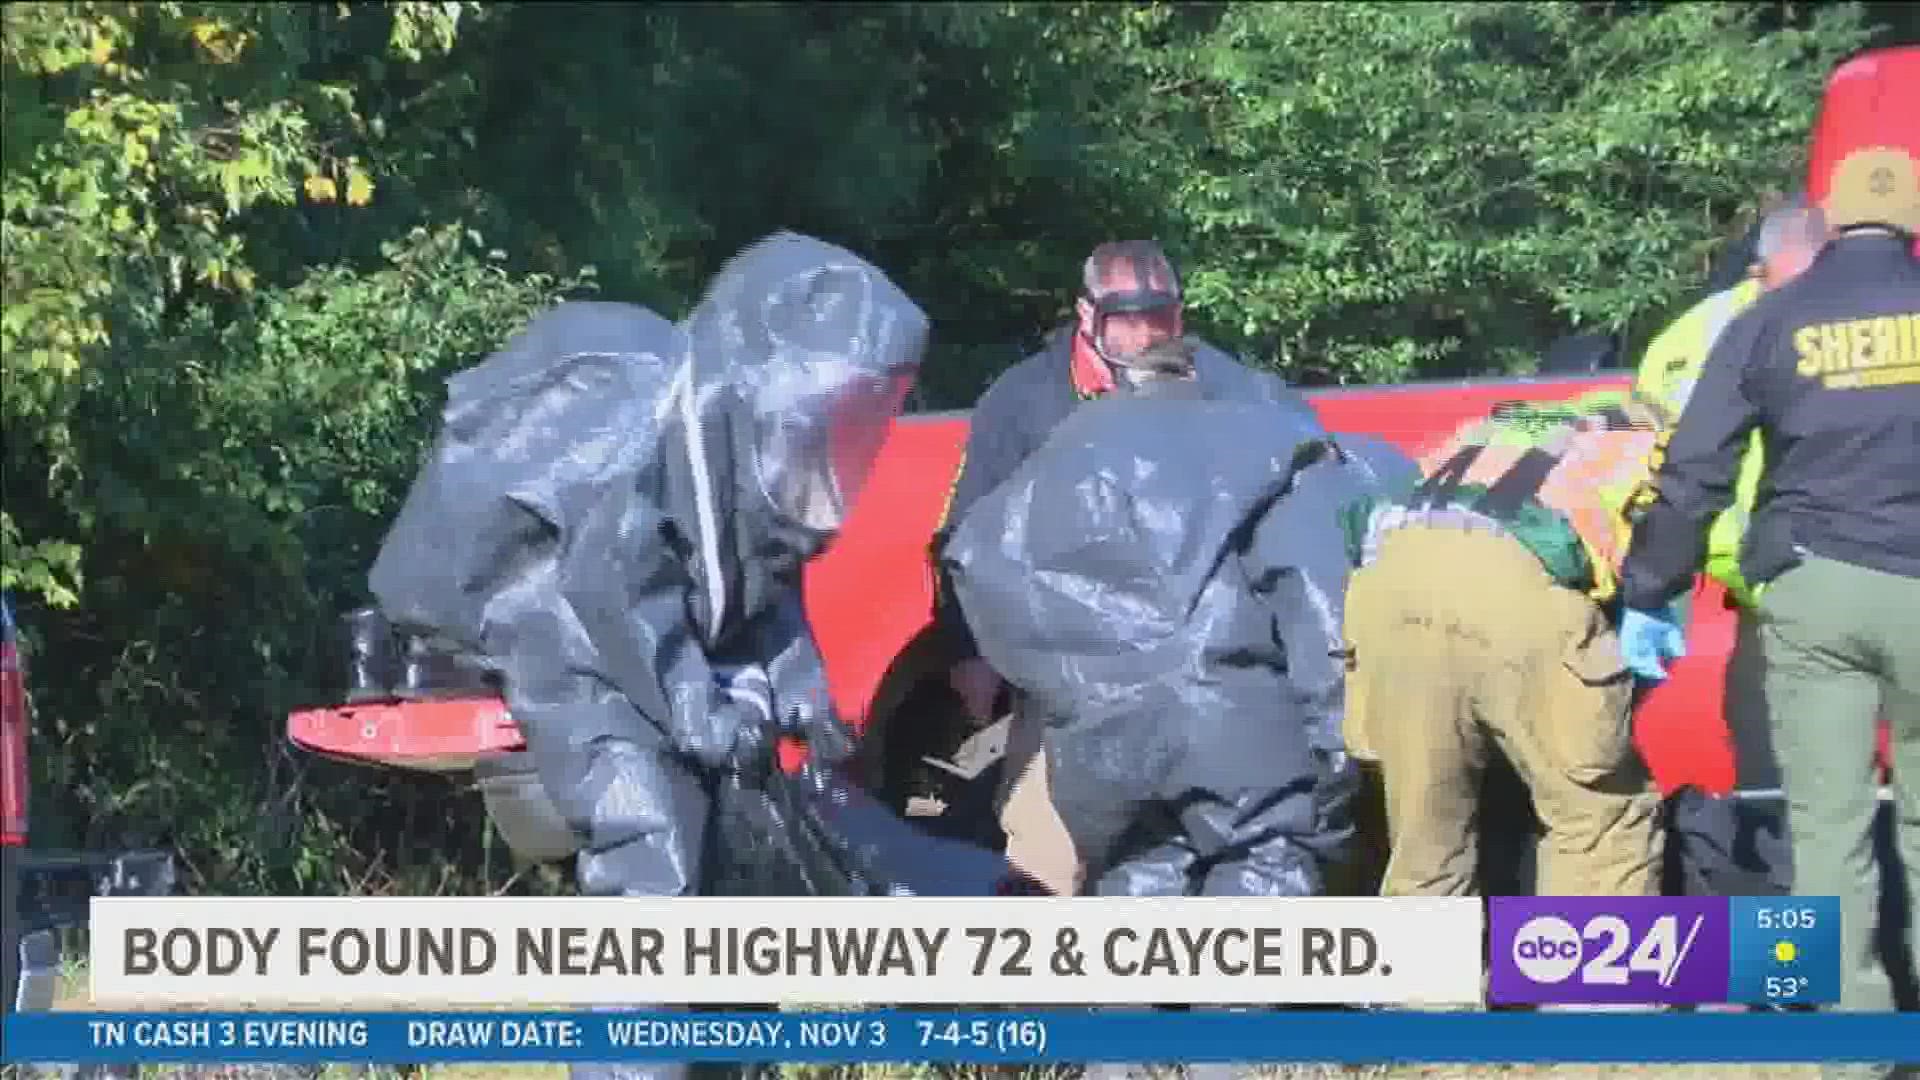 Investigators said the body was found about 3 a.m. Thursday in a wooded area along Highway 72, about a half-mile east of Cayce Road.